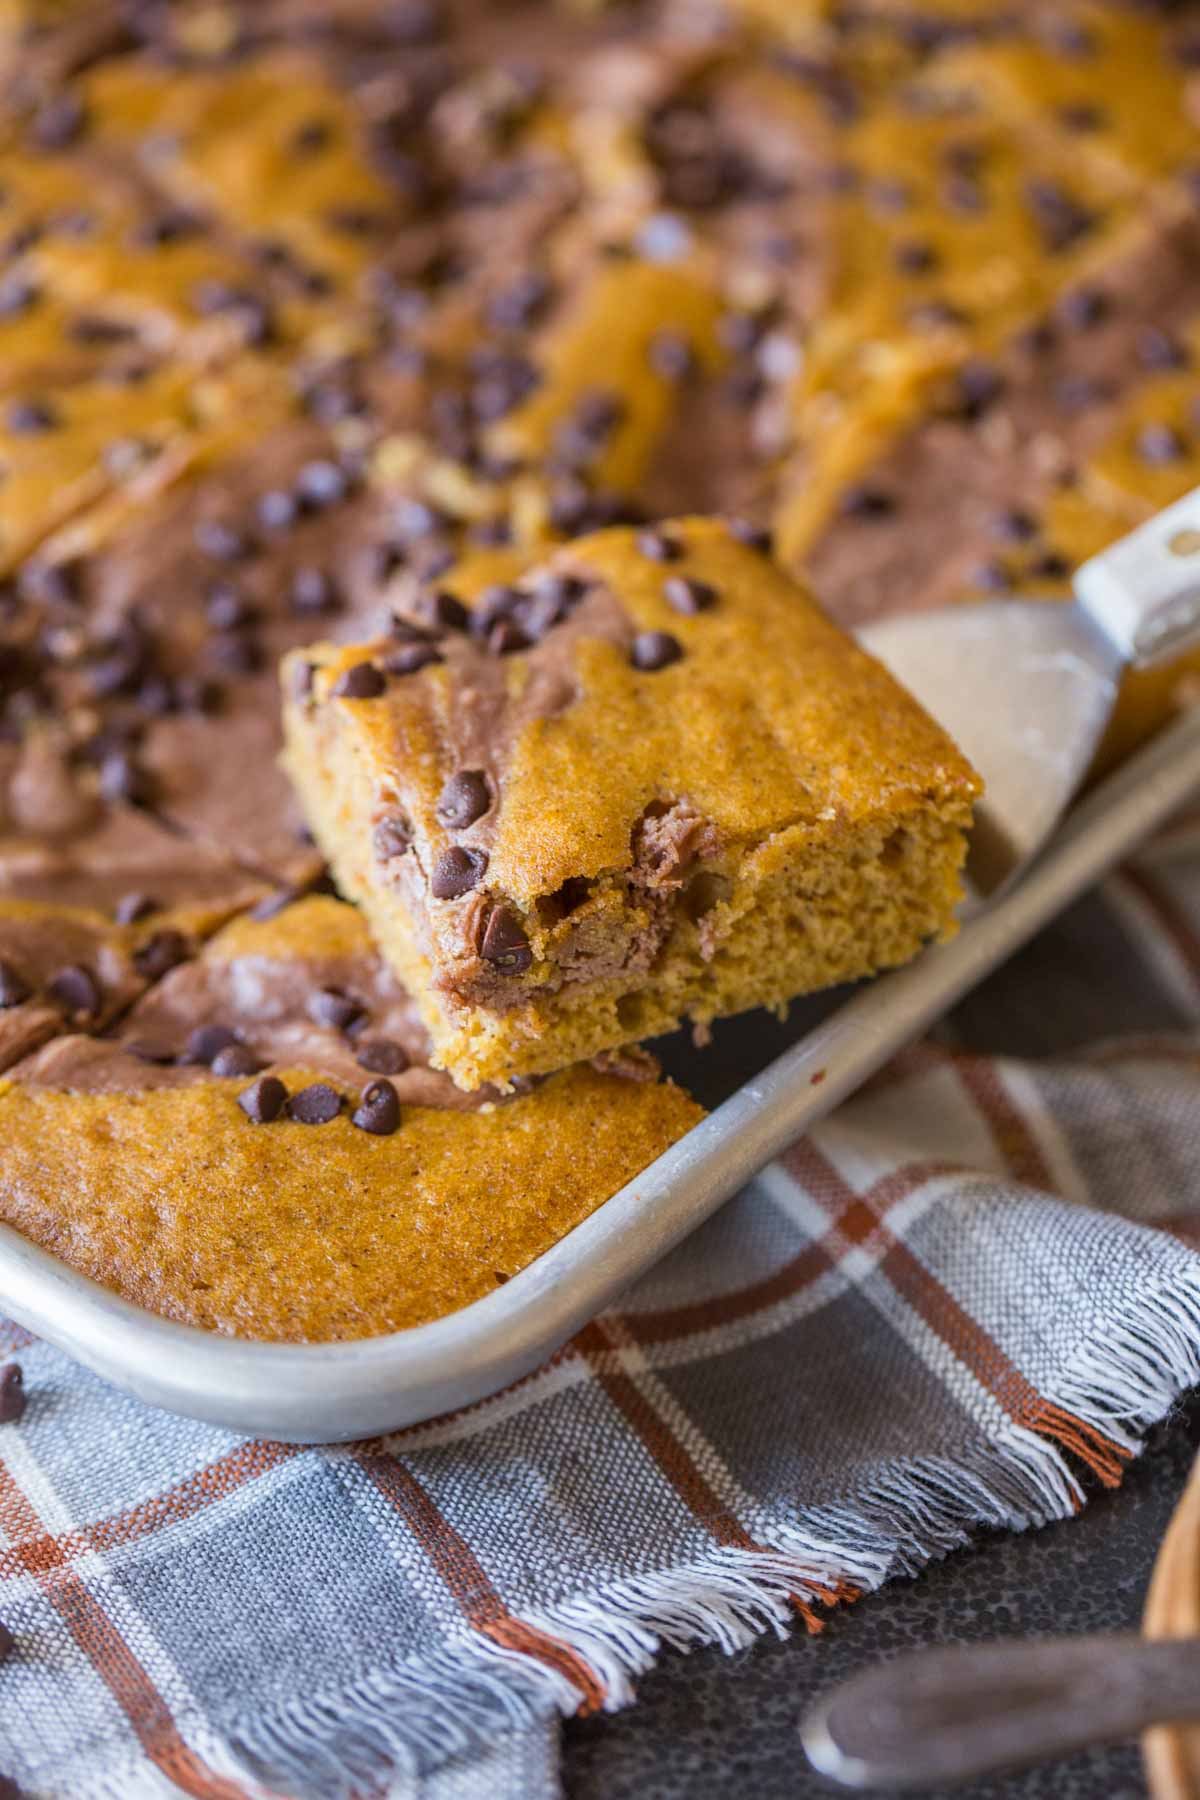 Chocolate-Swirled Pumpkin Bars cut in a baking pan with a serving spatula under one of the bars.